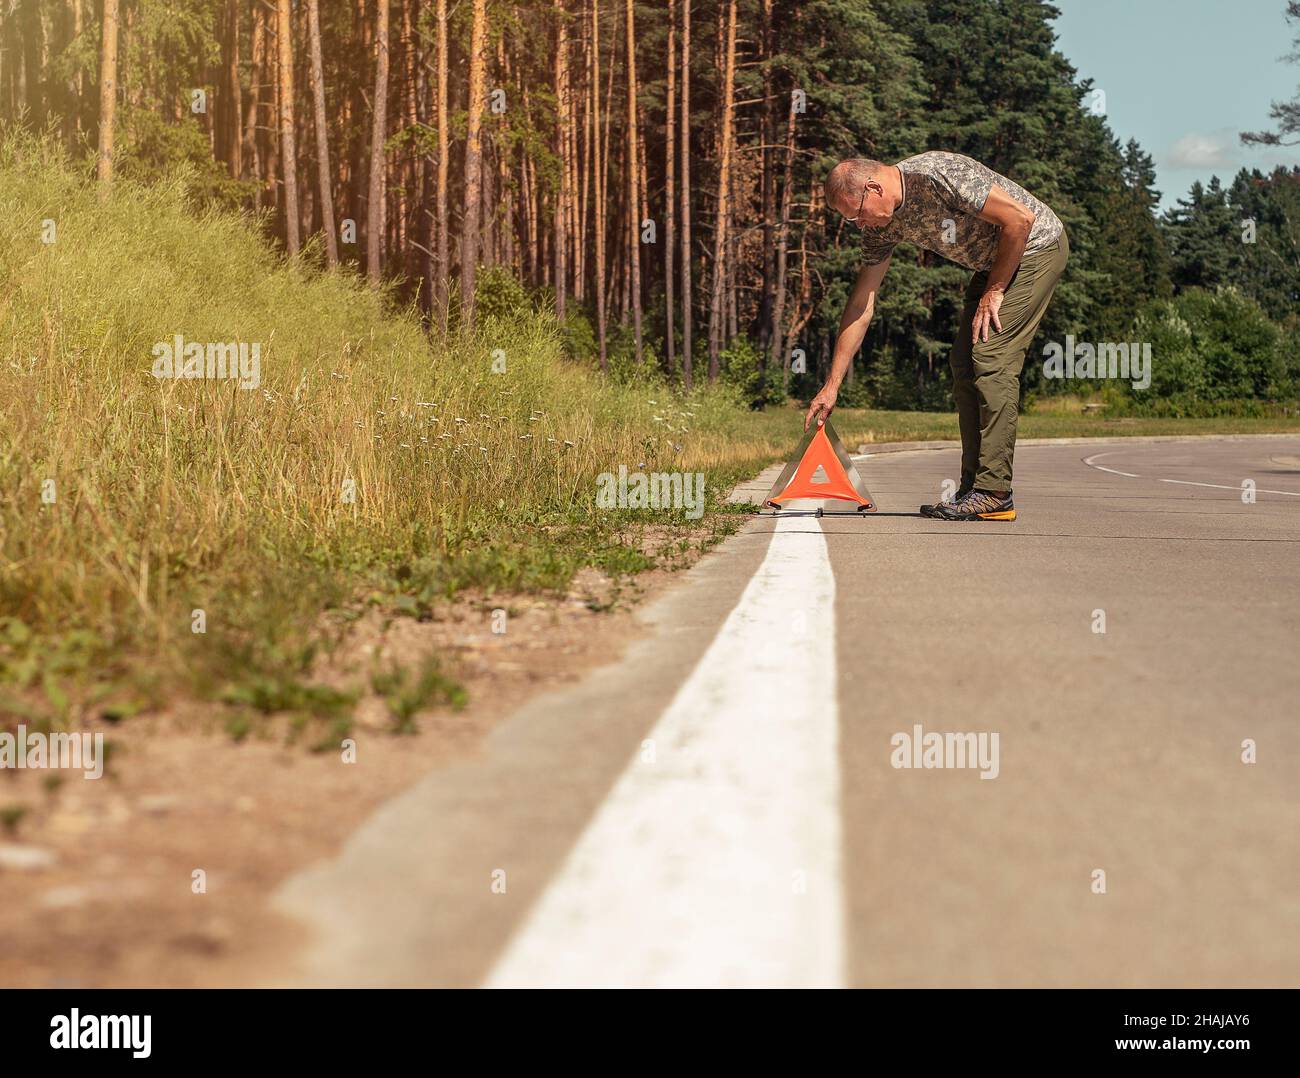 Man putting red triangle caution sign on road side in nature. Stock Photo